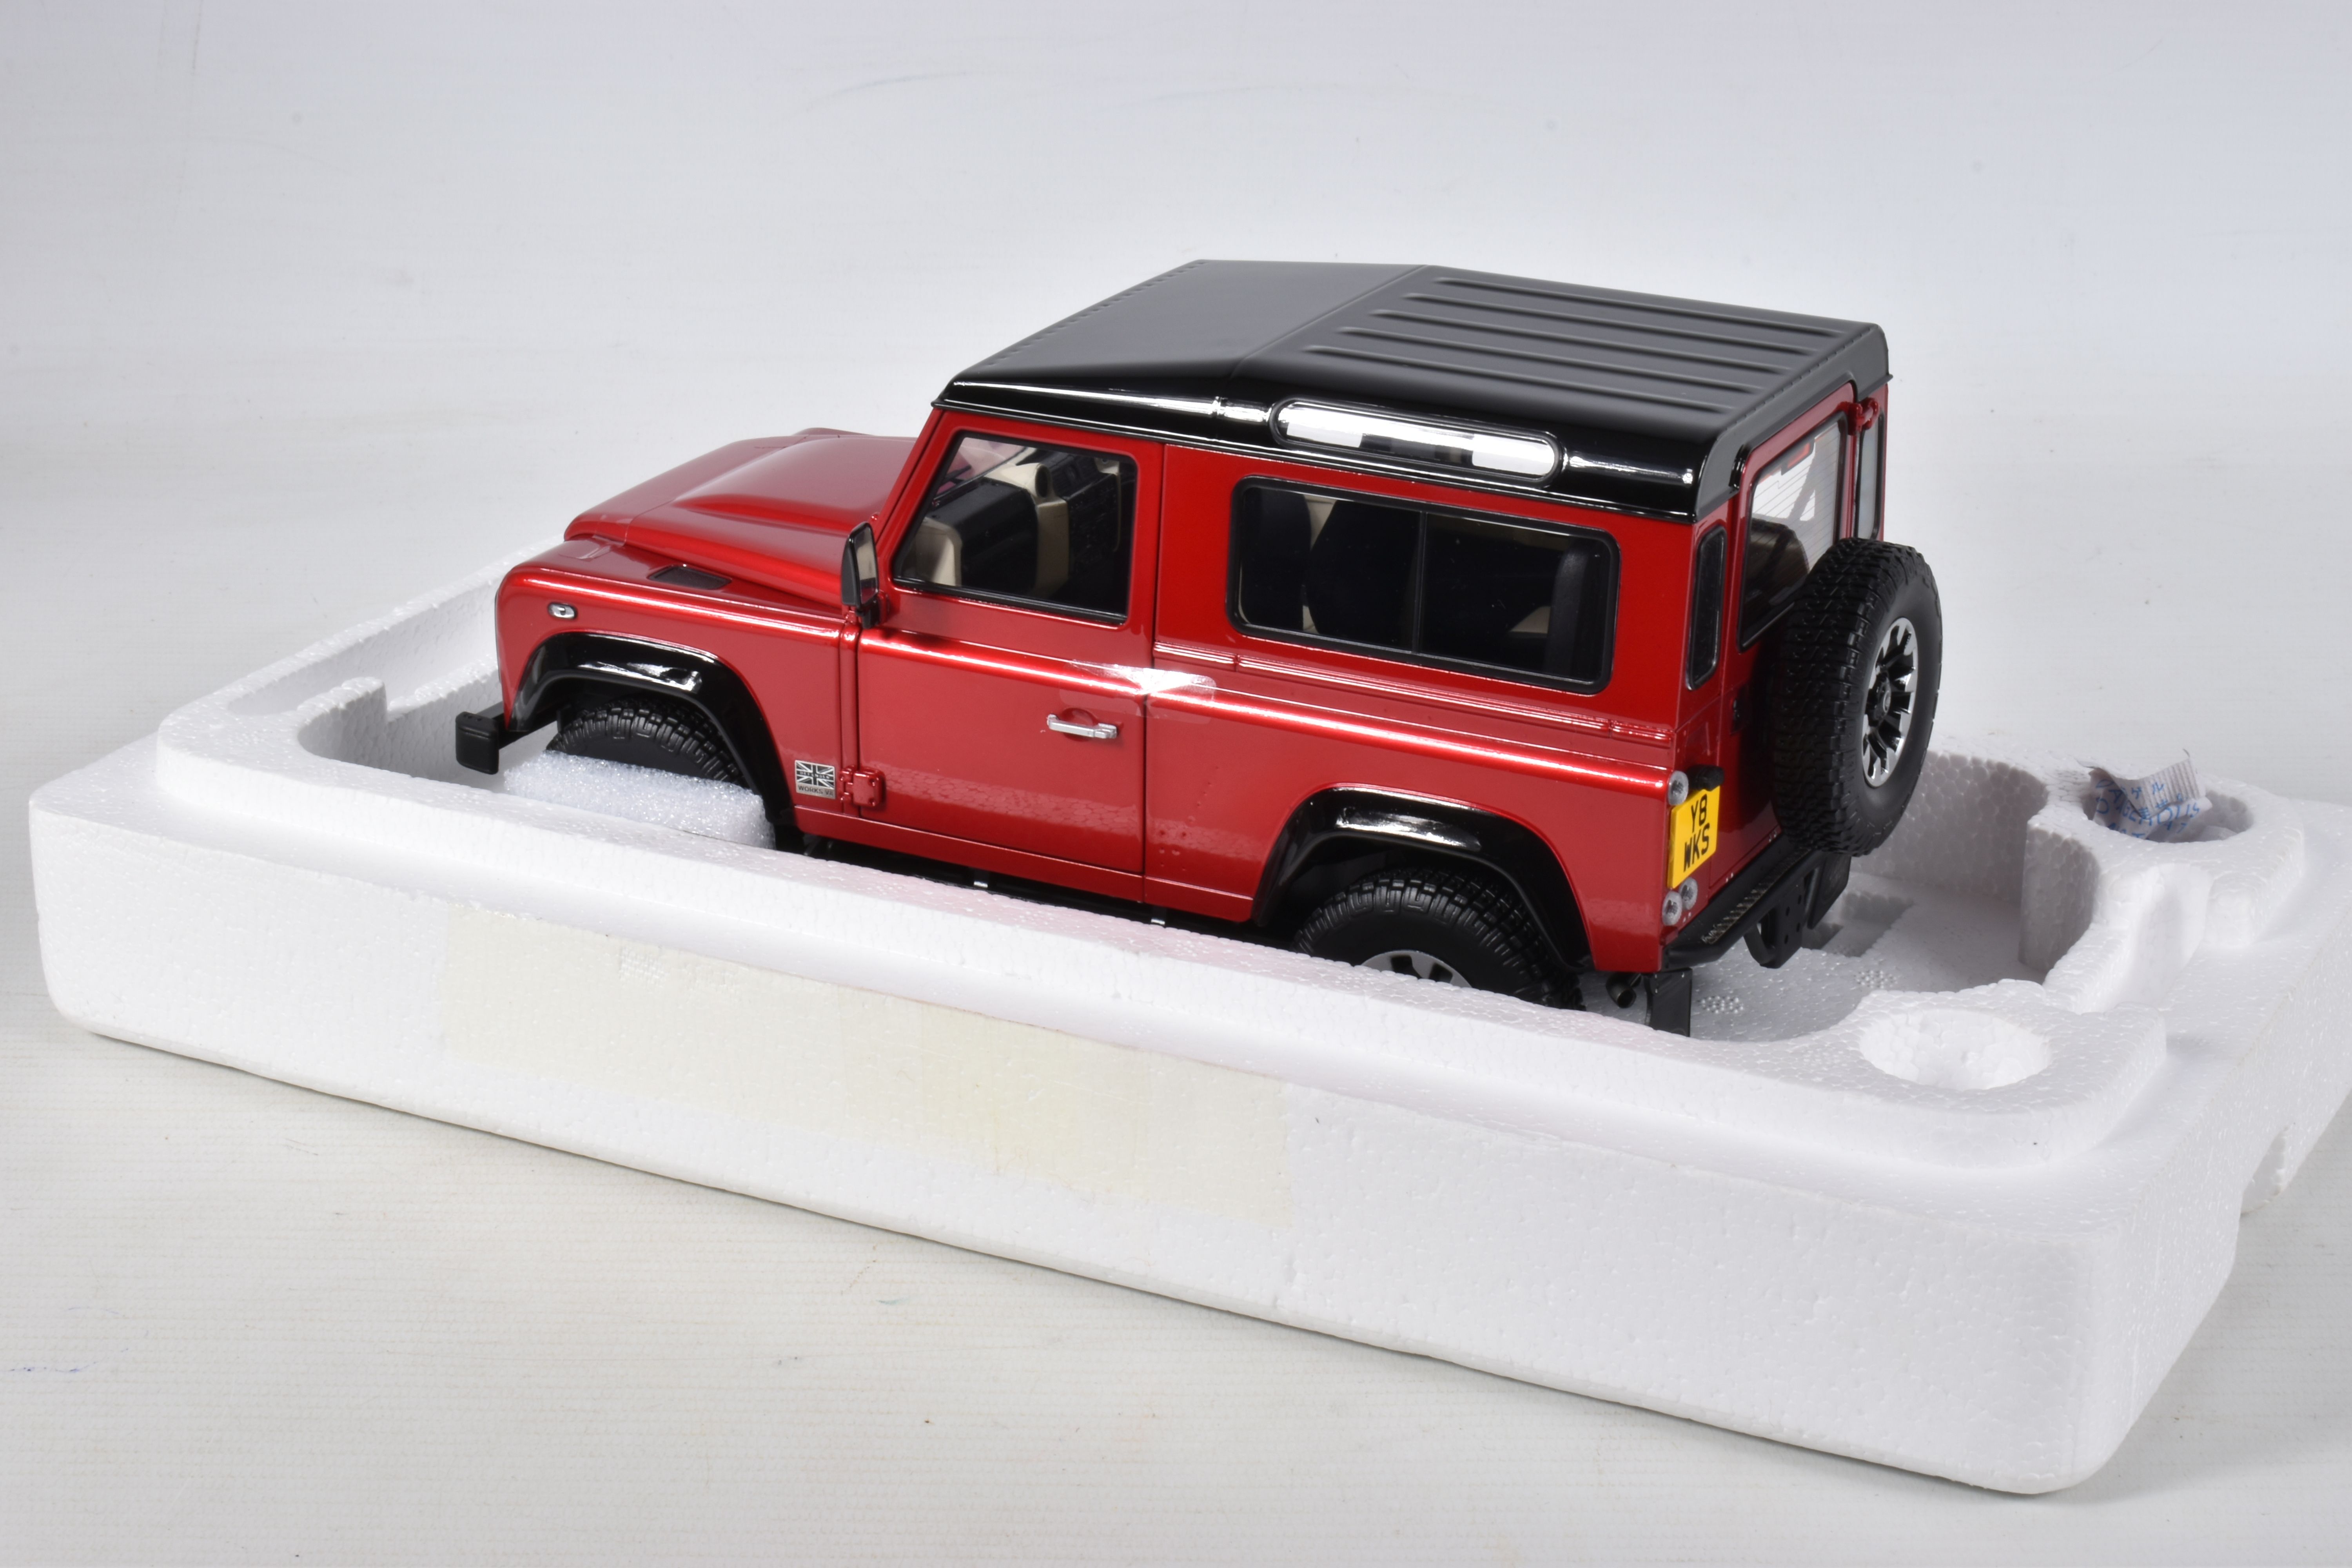 A BOXED ALMOST REAL LAND ROVER DEFENDER 90 SCALE 1:18 MODEL VEHICLE, numbered 810215, painted red - Image 6 of 9